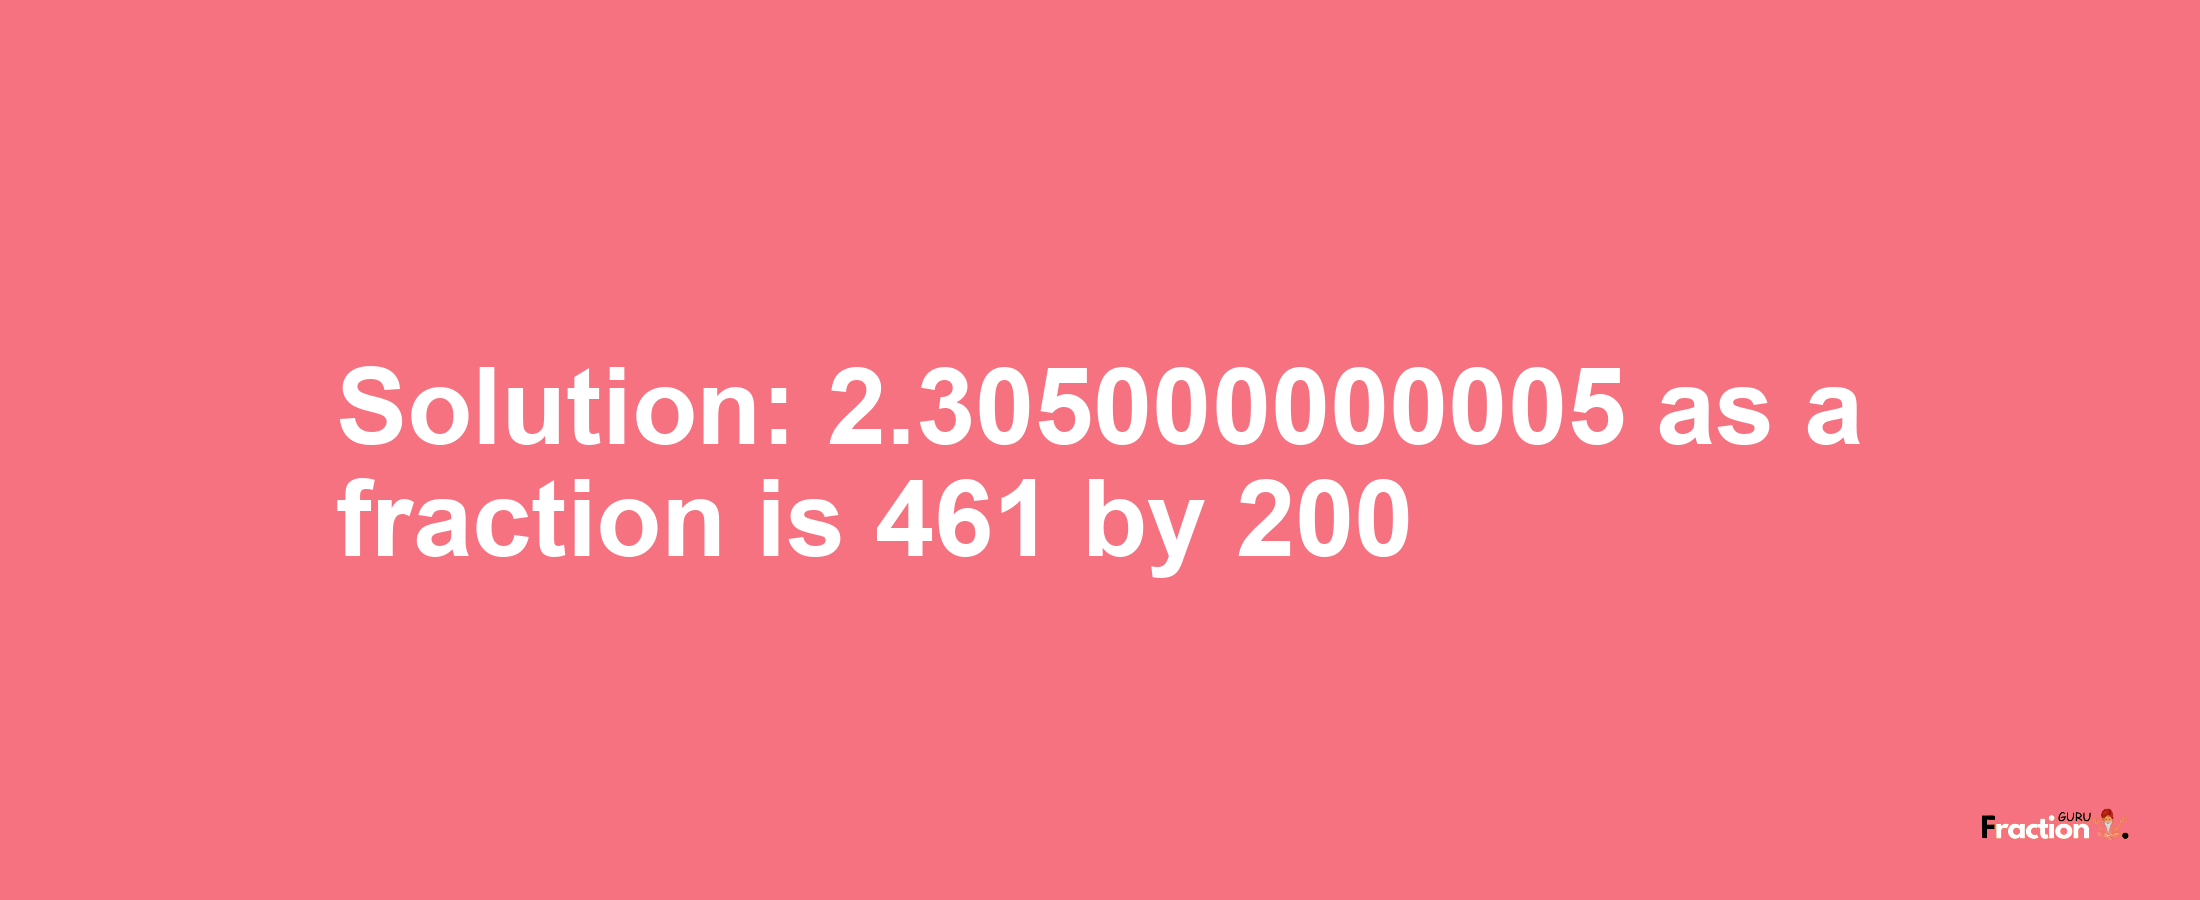 Solution:2.305000000005 as a fraction is 461/200